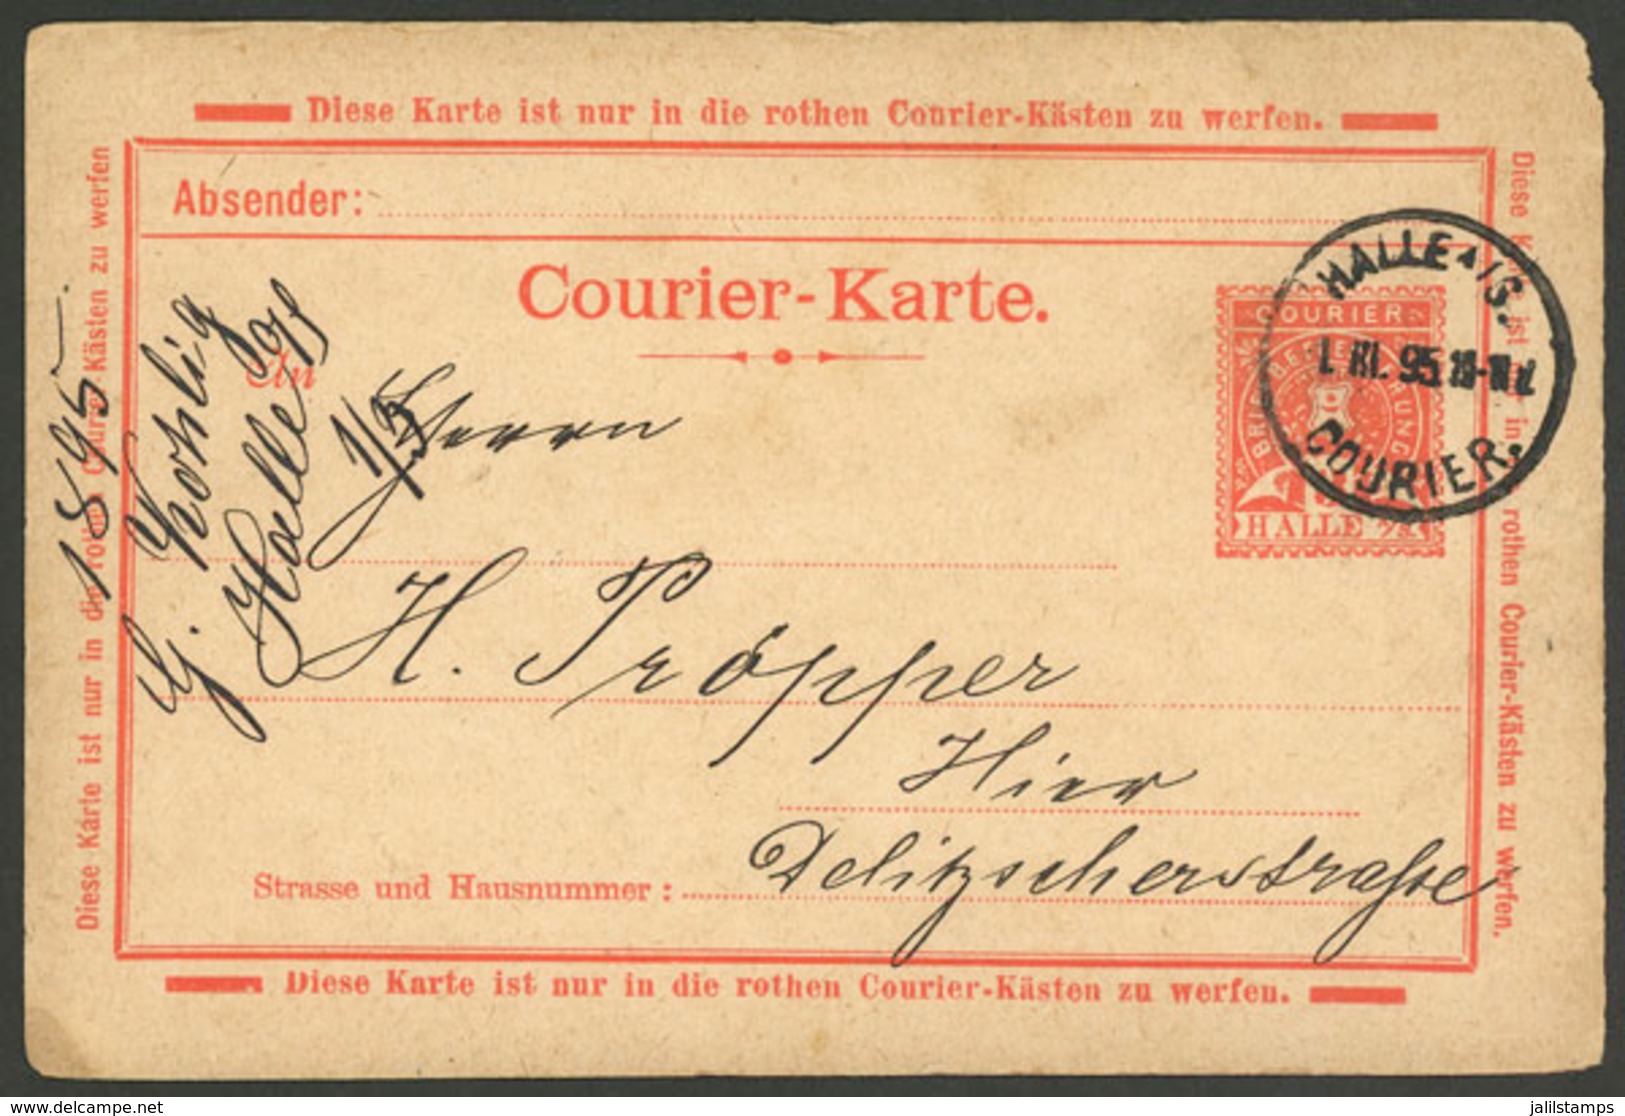 GERMANY: Postal Card Of Private Post Used In Halle On 1/MAR/1895, VF And Attractive! - Covers & Documents